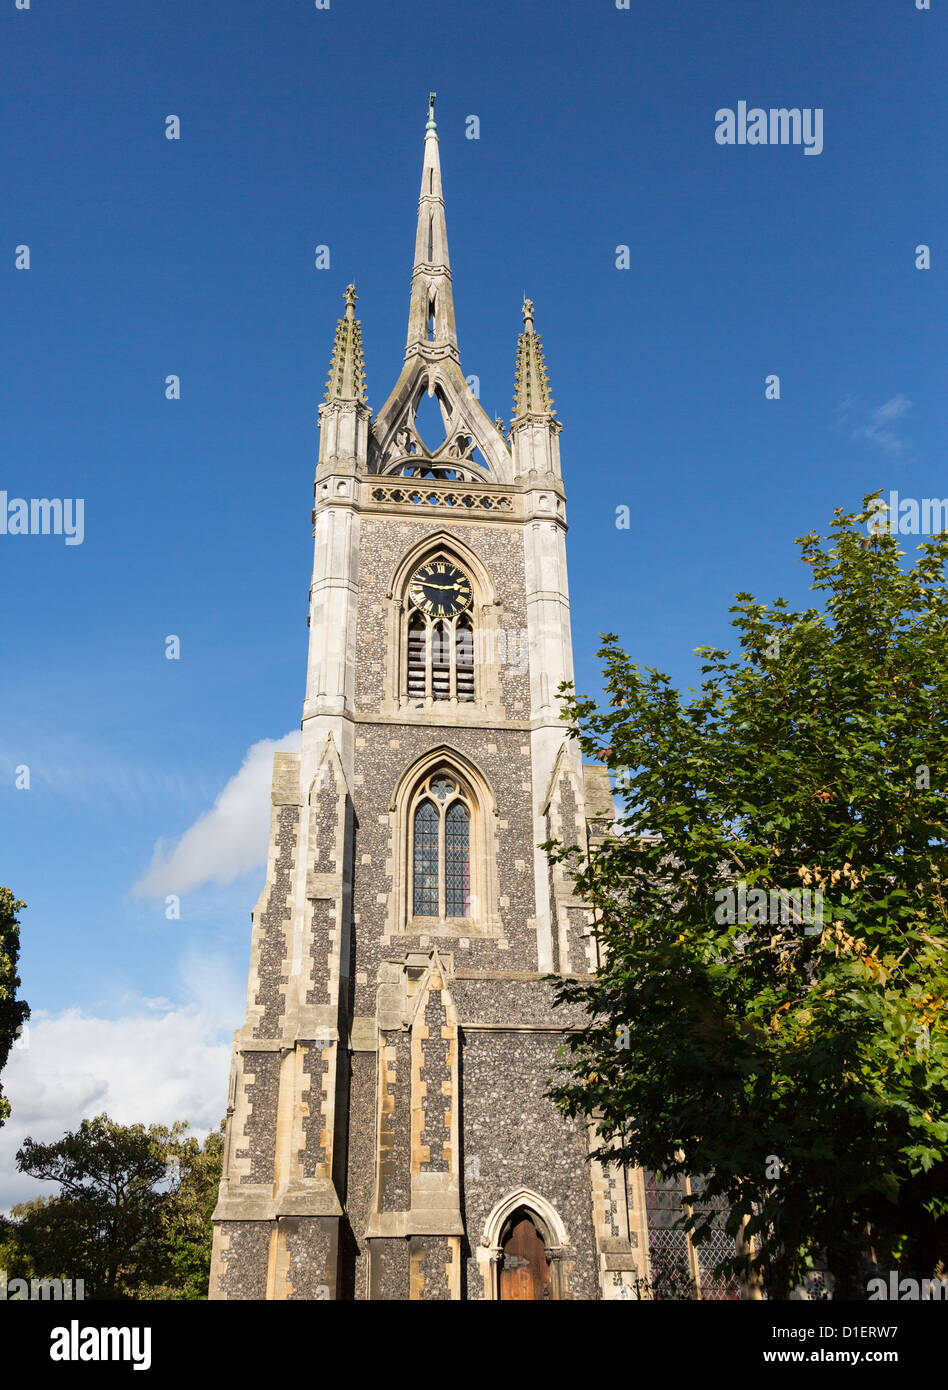 Old and unique church tower in Faversham Kent with crown spire on top Stock Photo